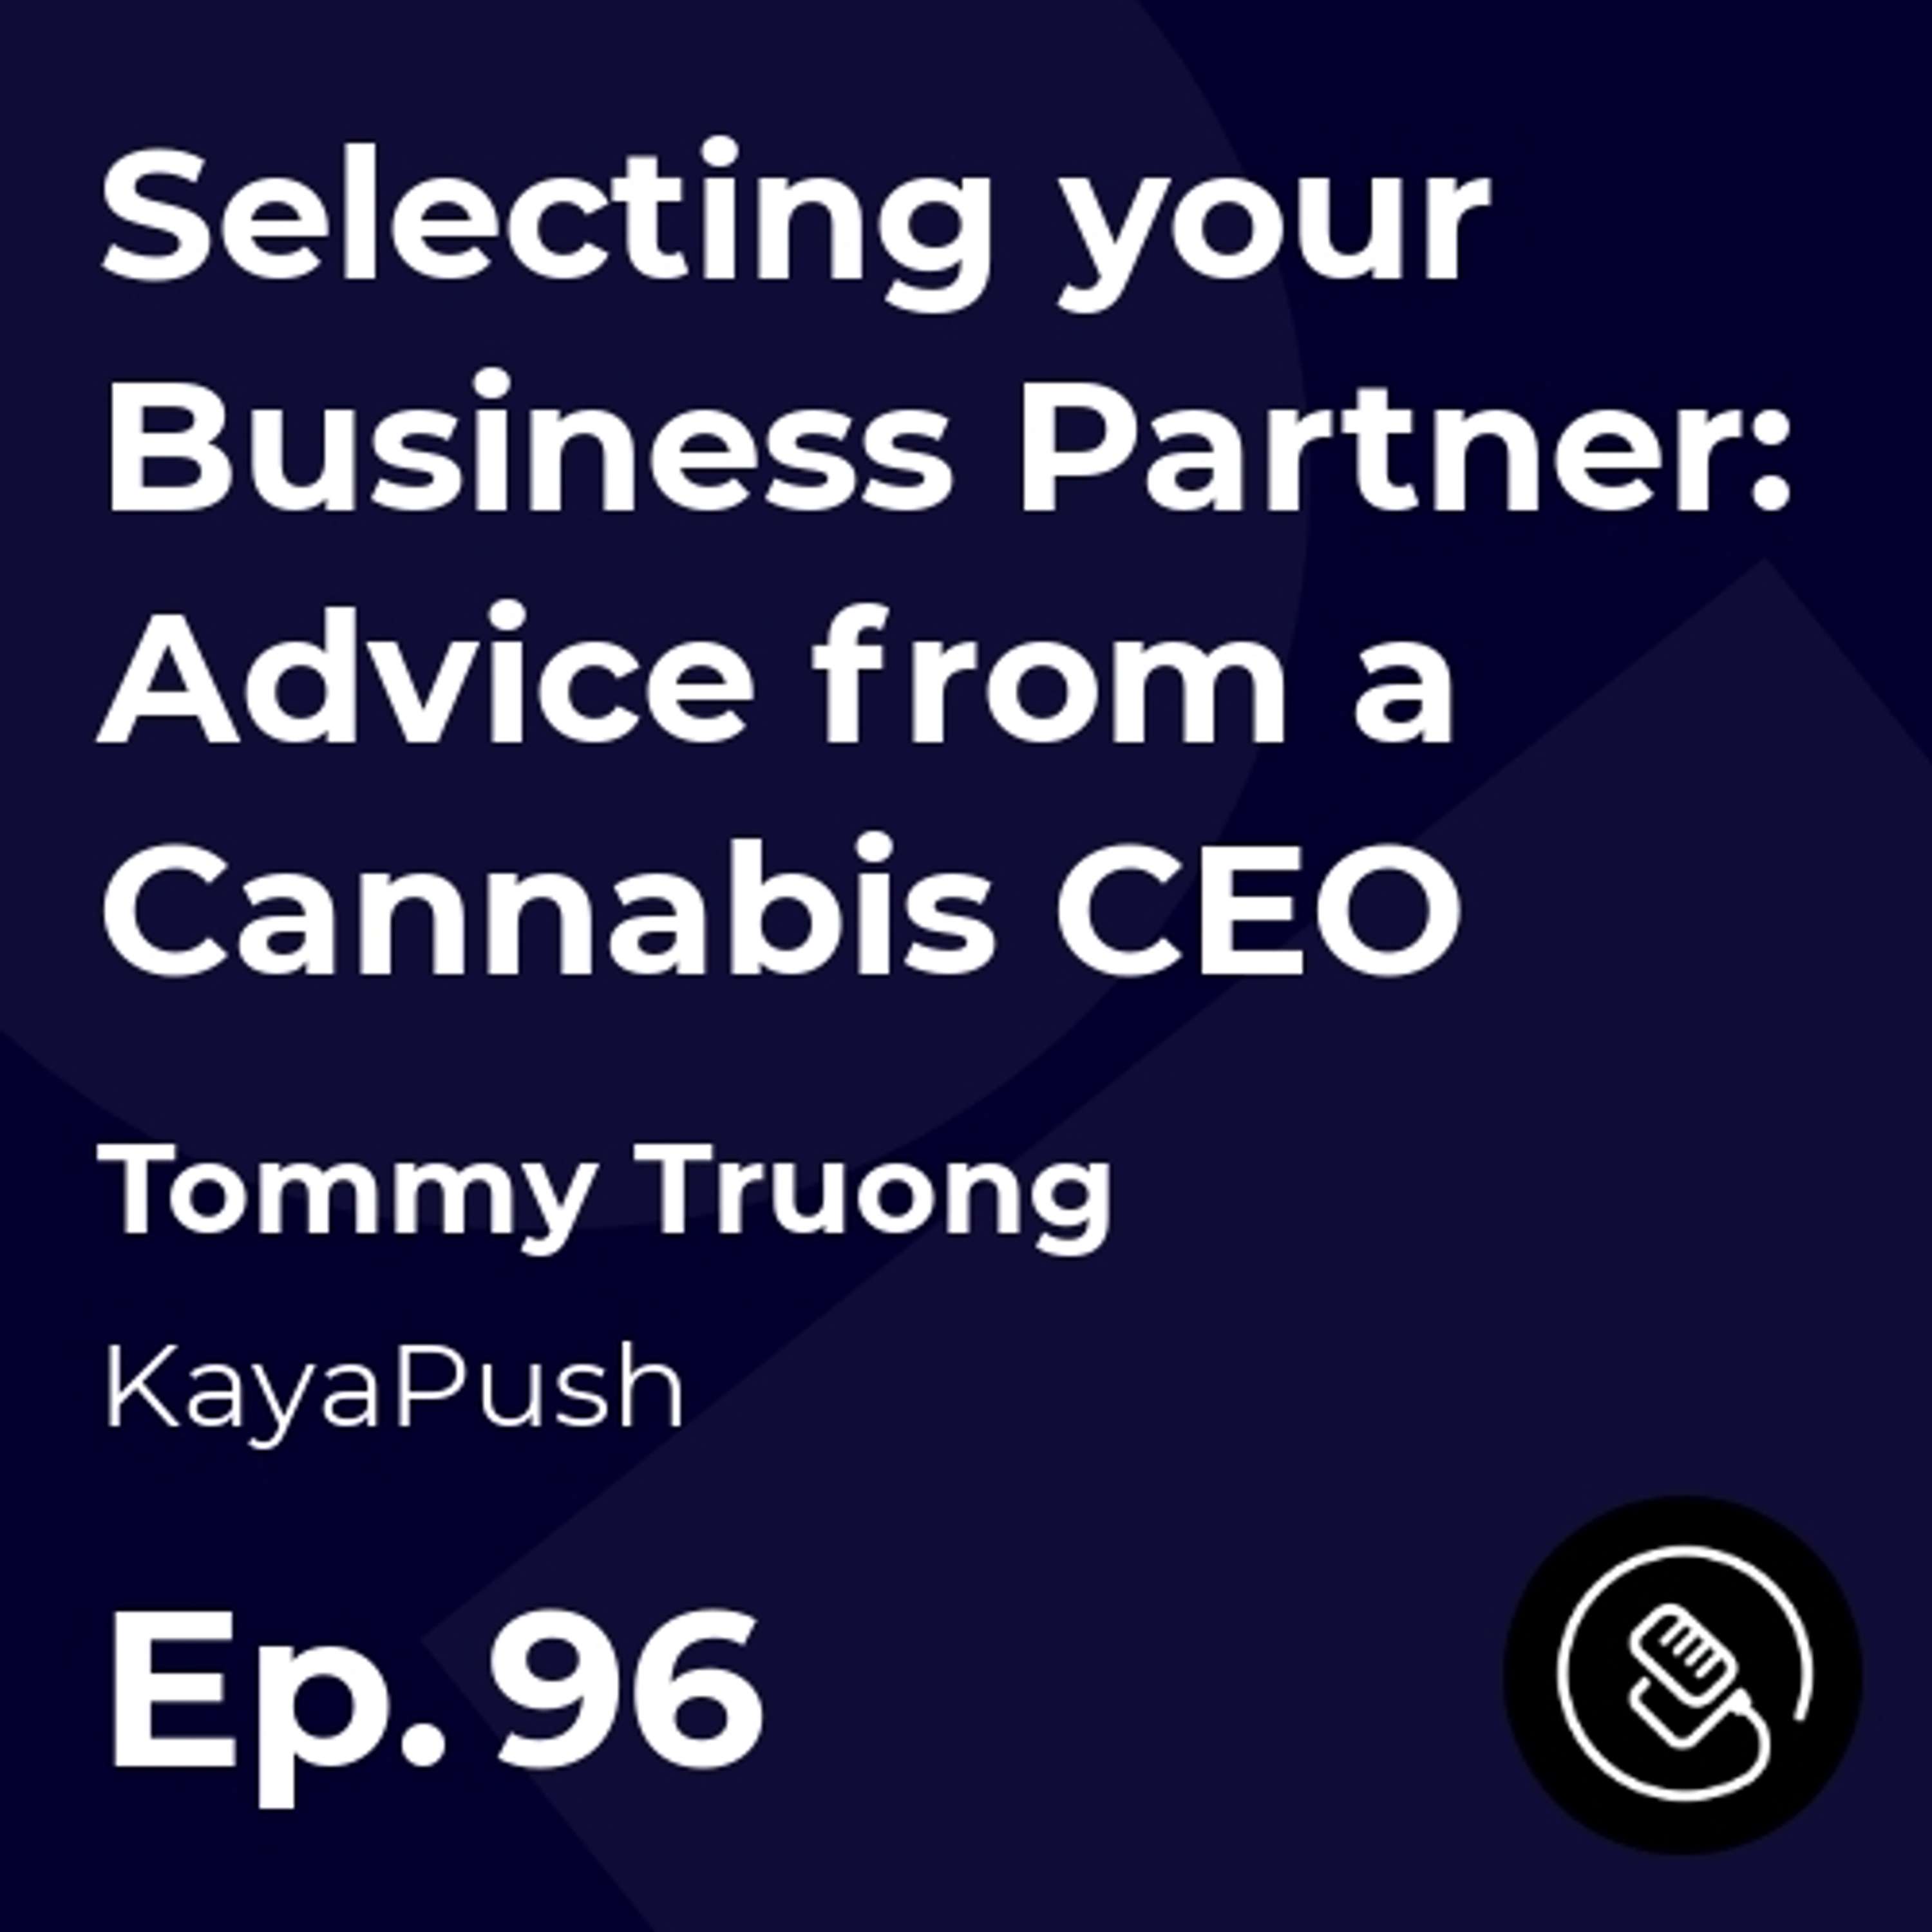 Selecting your Business Partner: Advice from a Cannabis CEO